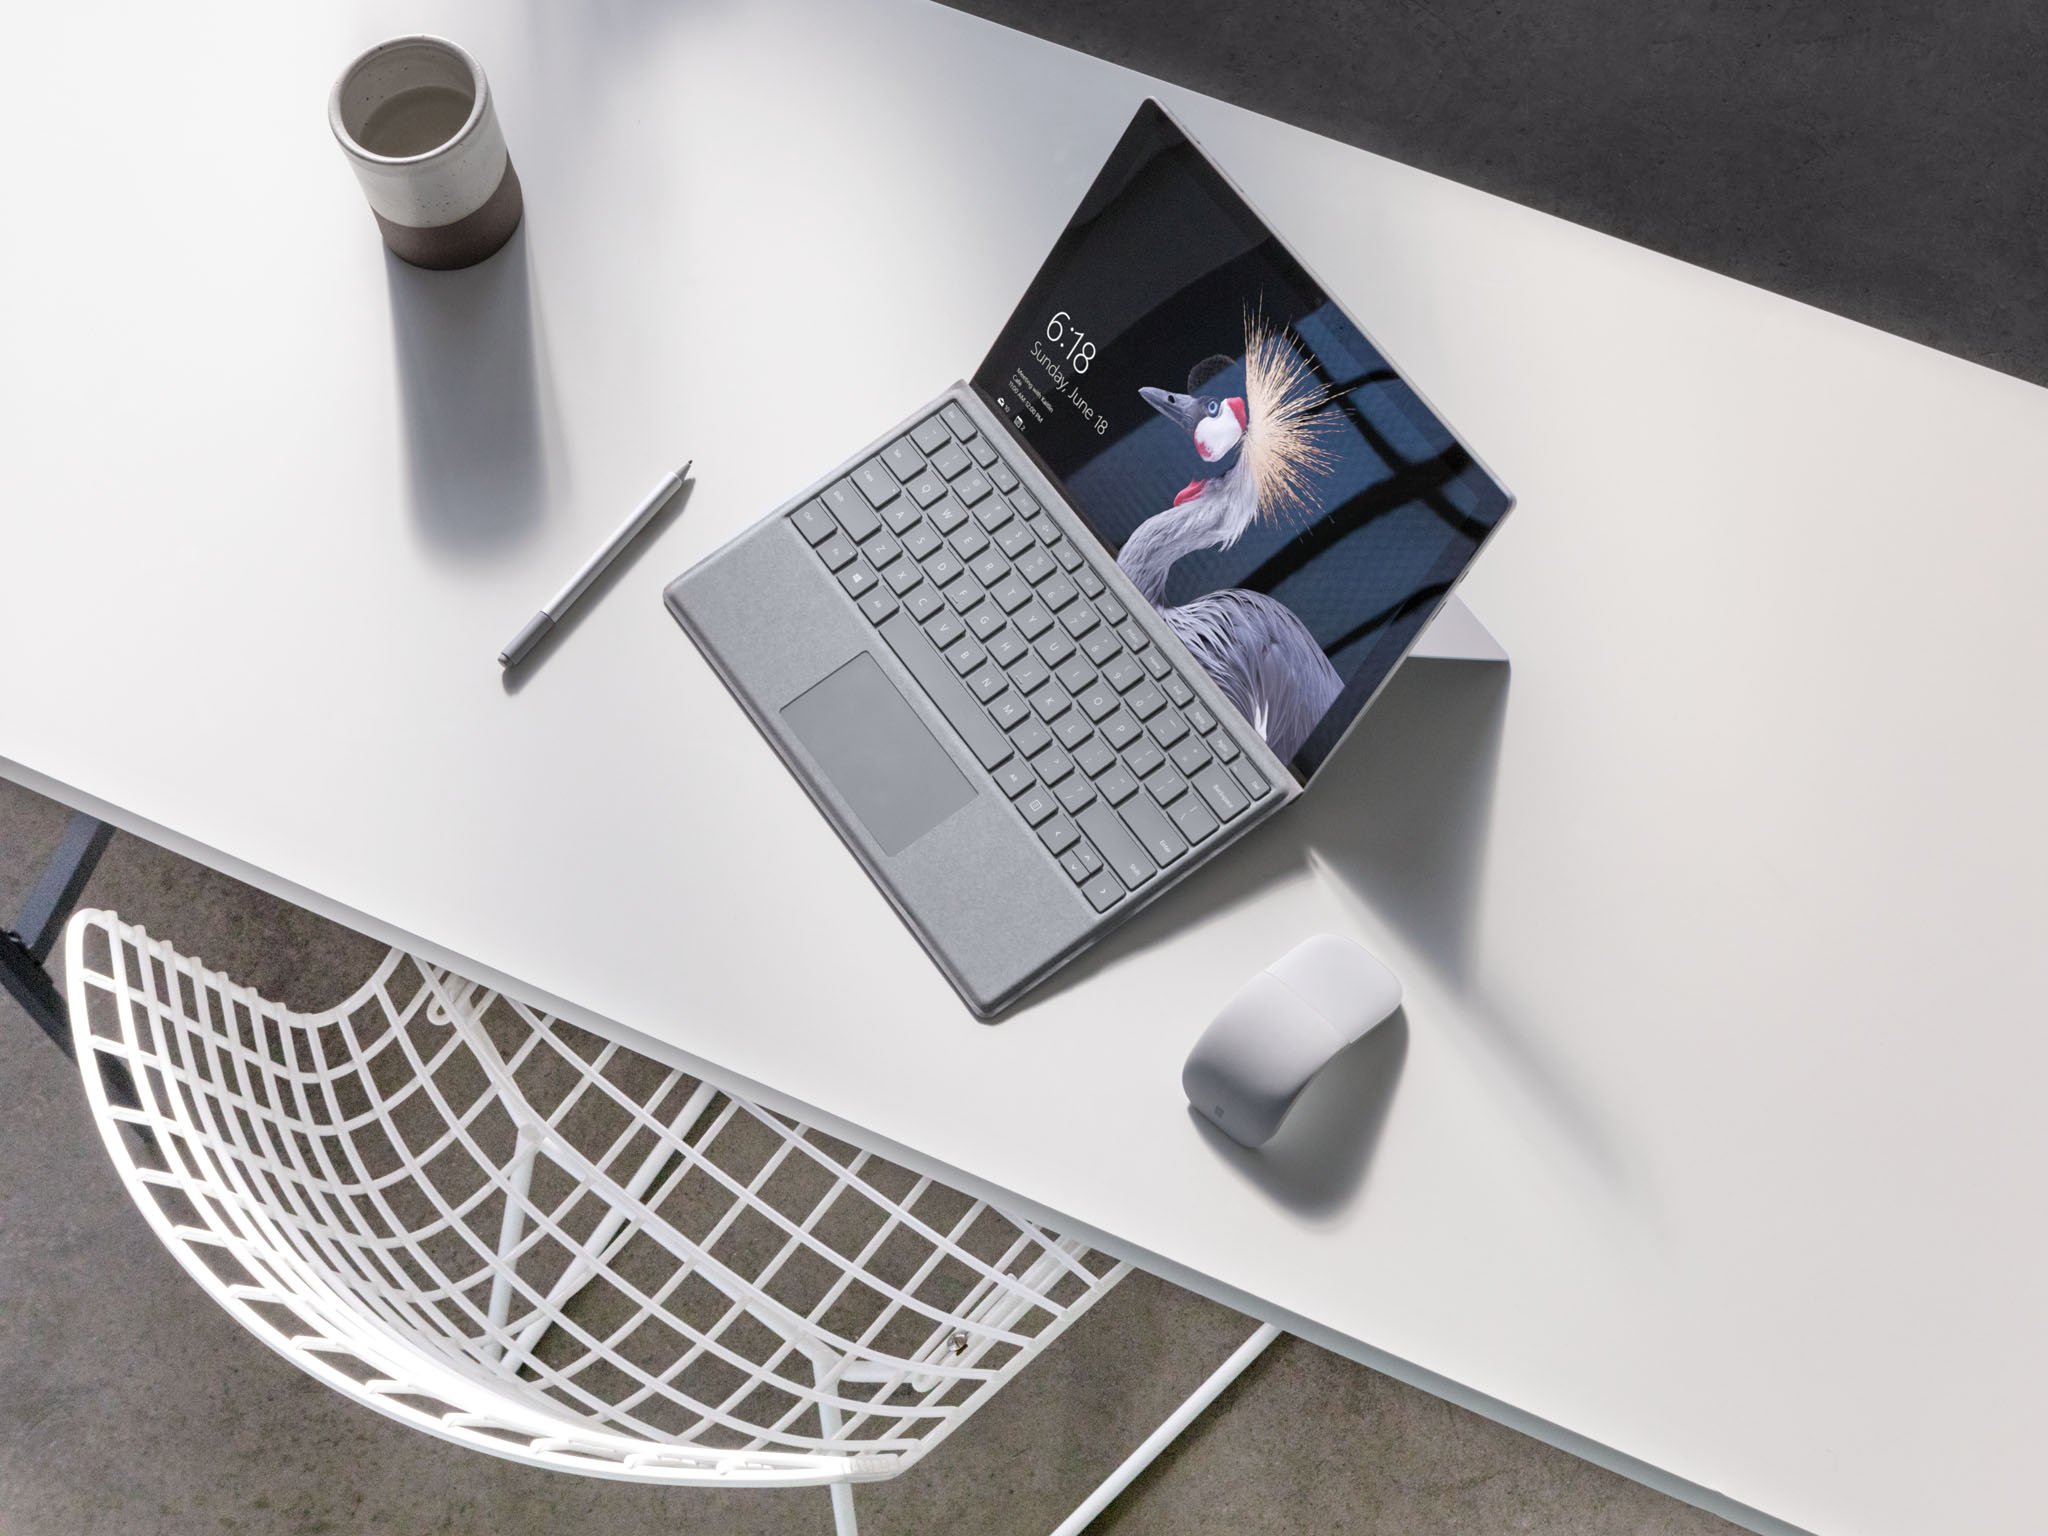 Should you buy the Surface Pro 4 instead of the new Surface Pro?